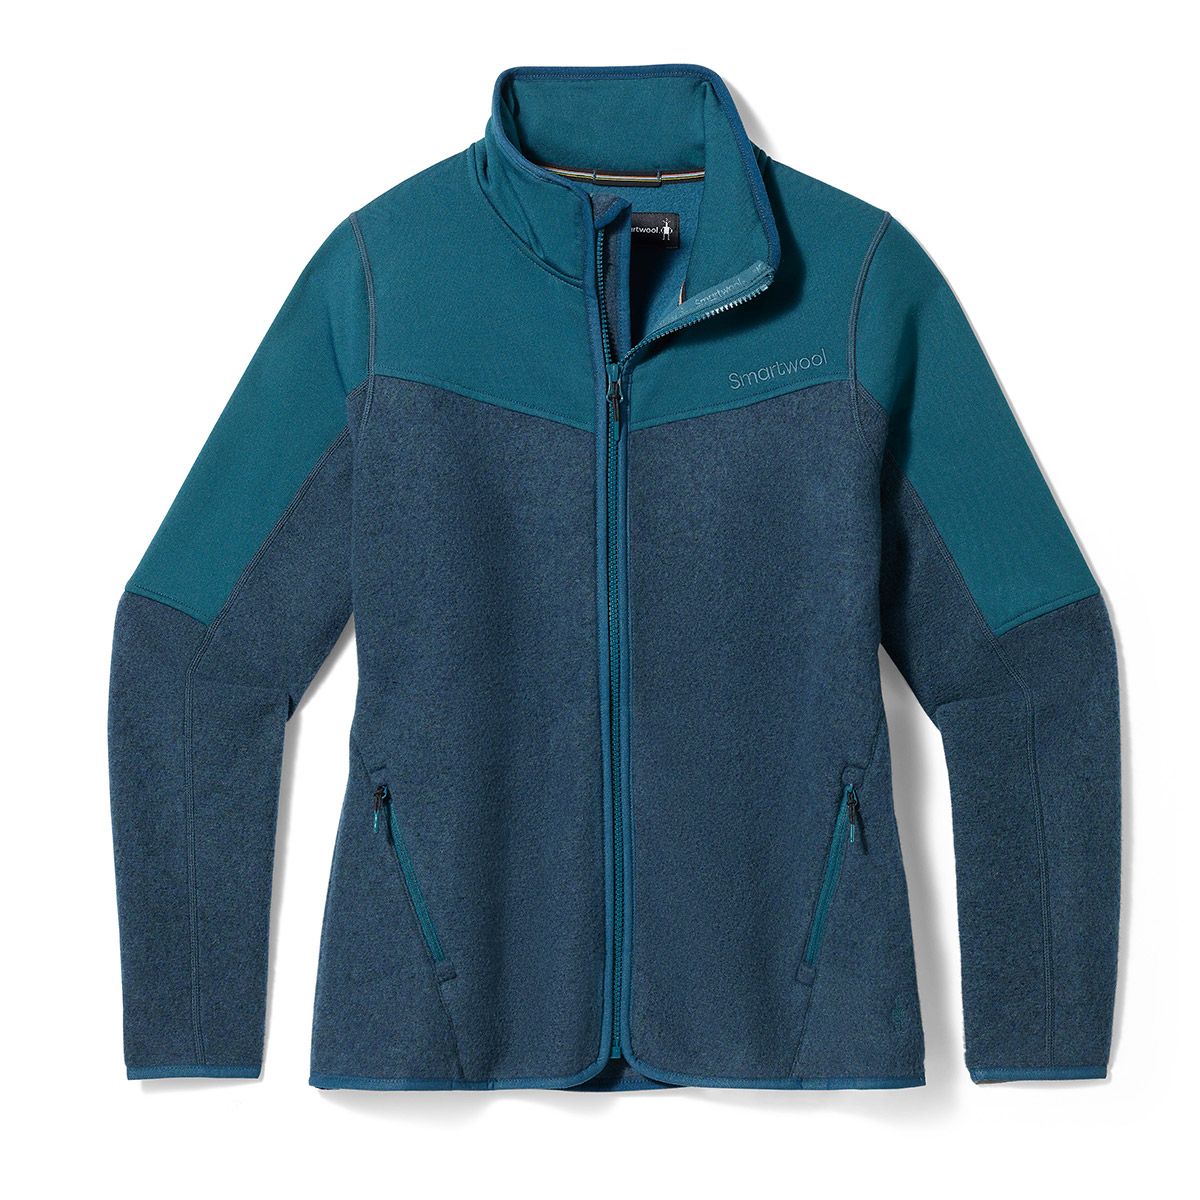 Smartwool Canada - The Hudson Trail Pullover Fleece Sweater keeps